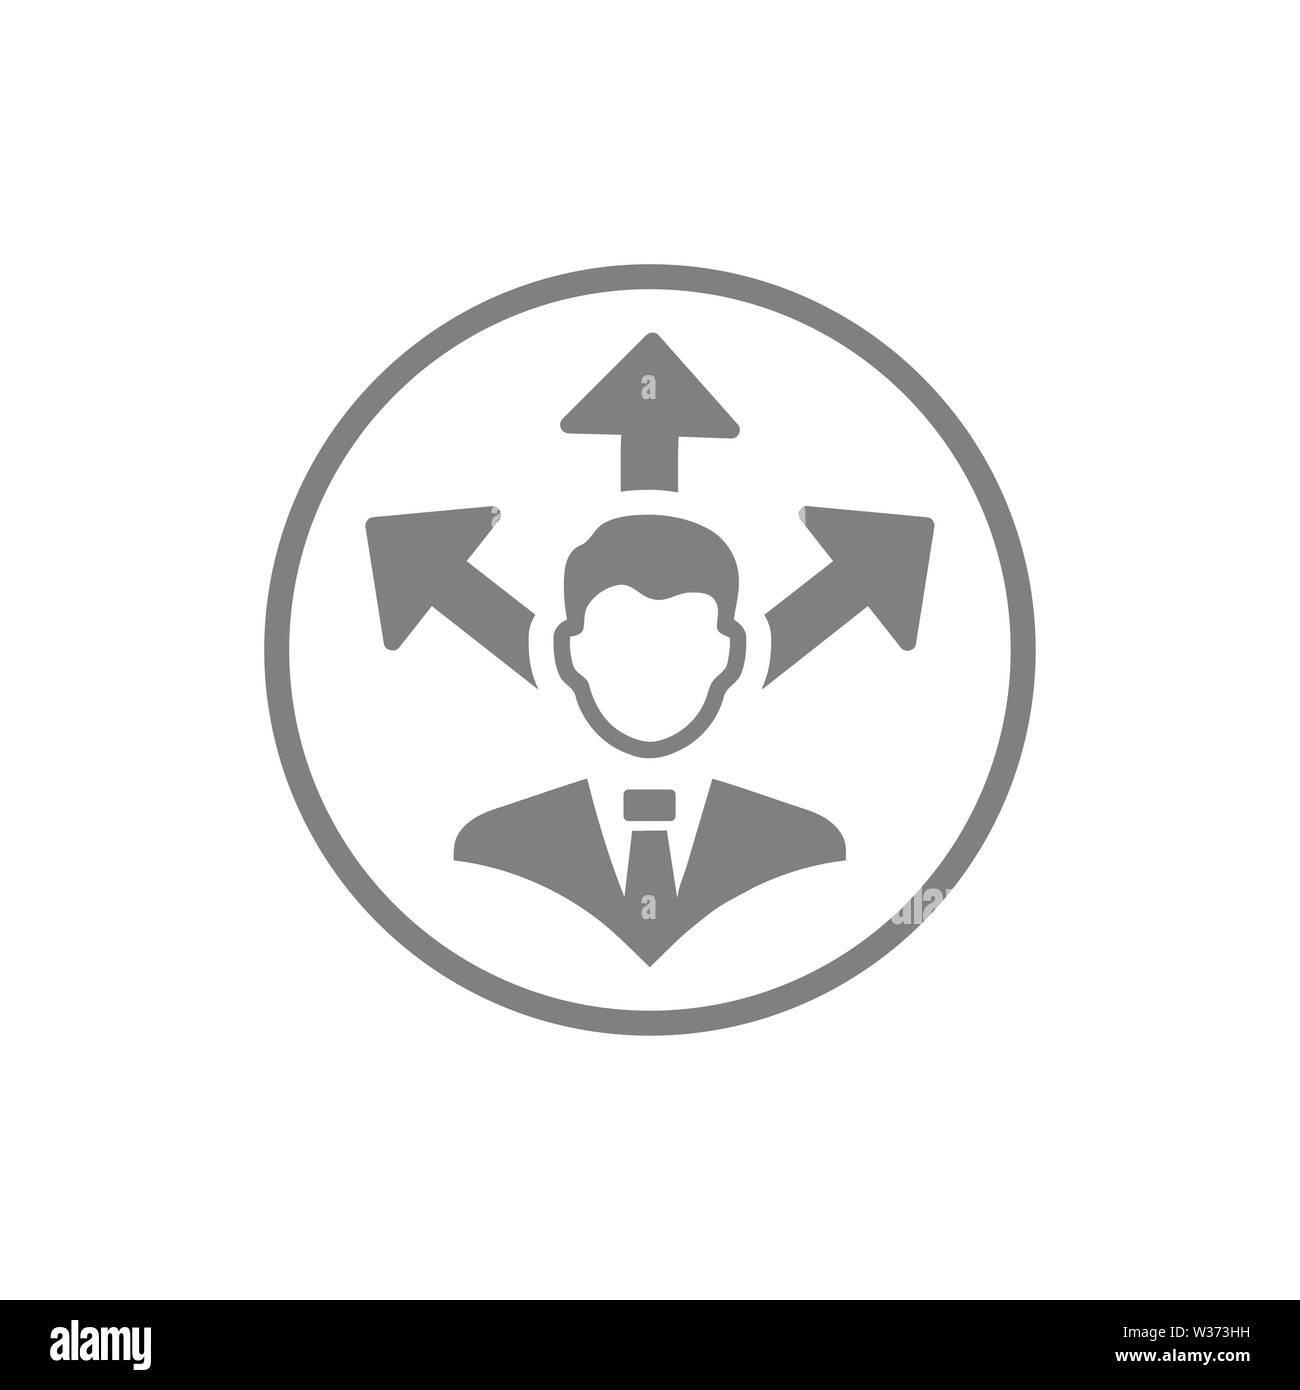 Business decision, business plan, decision making, management, plan, planning, strategy icon Stock Photo